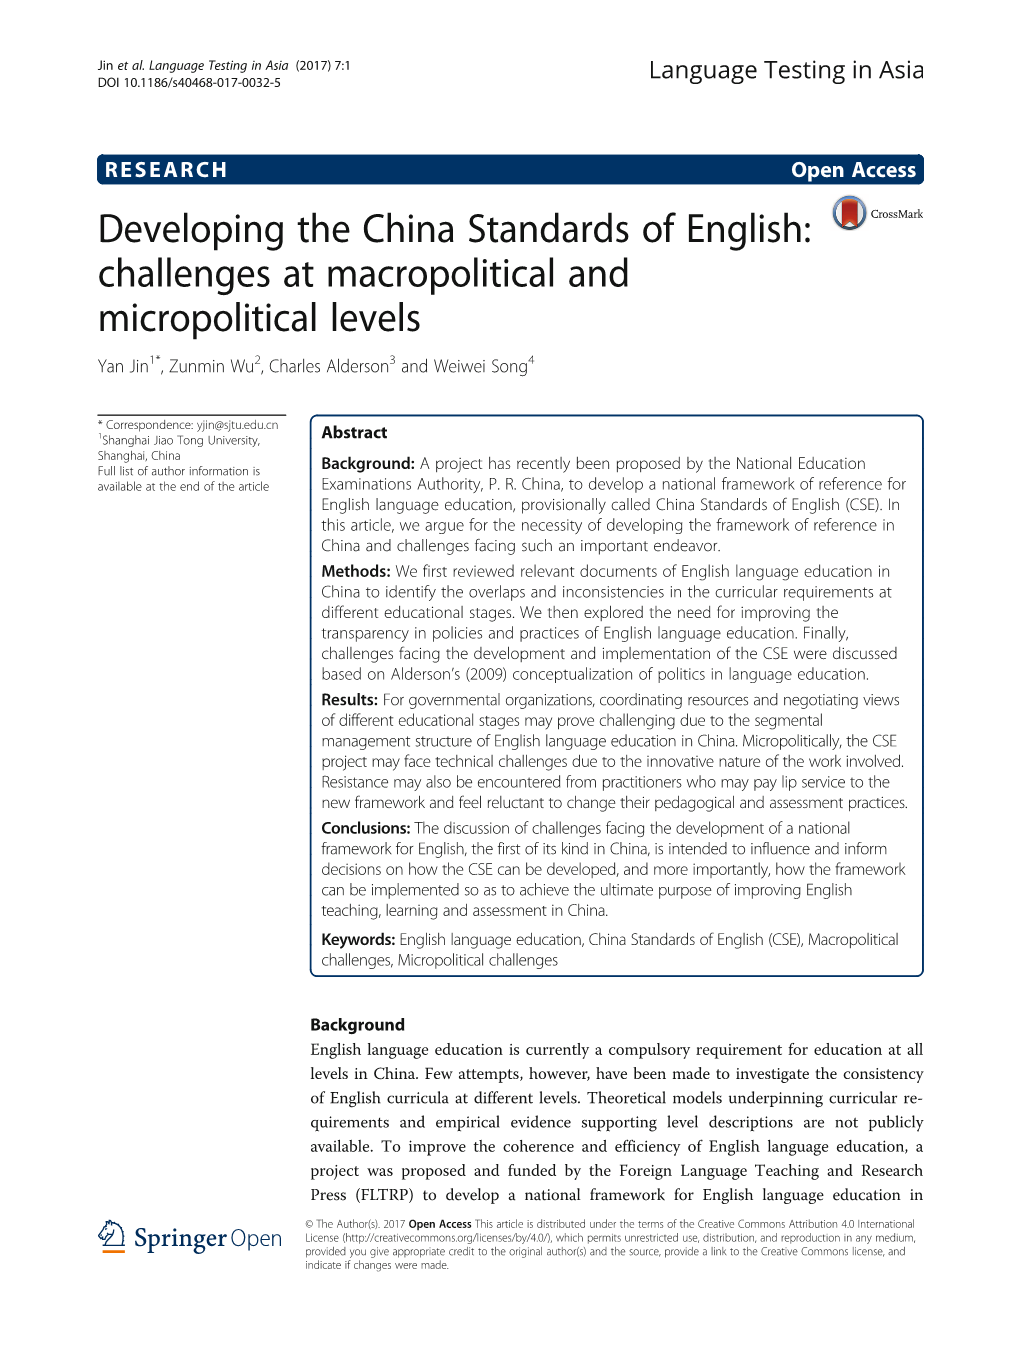 Developing the China Standards of English: Challenges at Macropolitical and Micropolitical Levels Yan Jin1*, Zunmin Wu2, Charles Alderson3 and Weiwei Song4